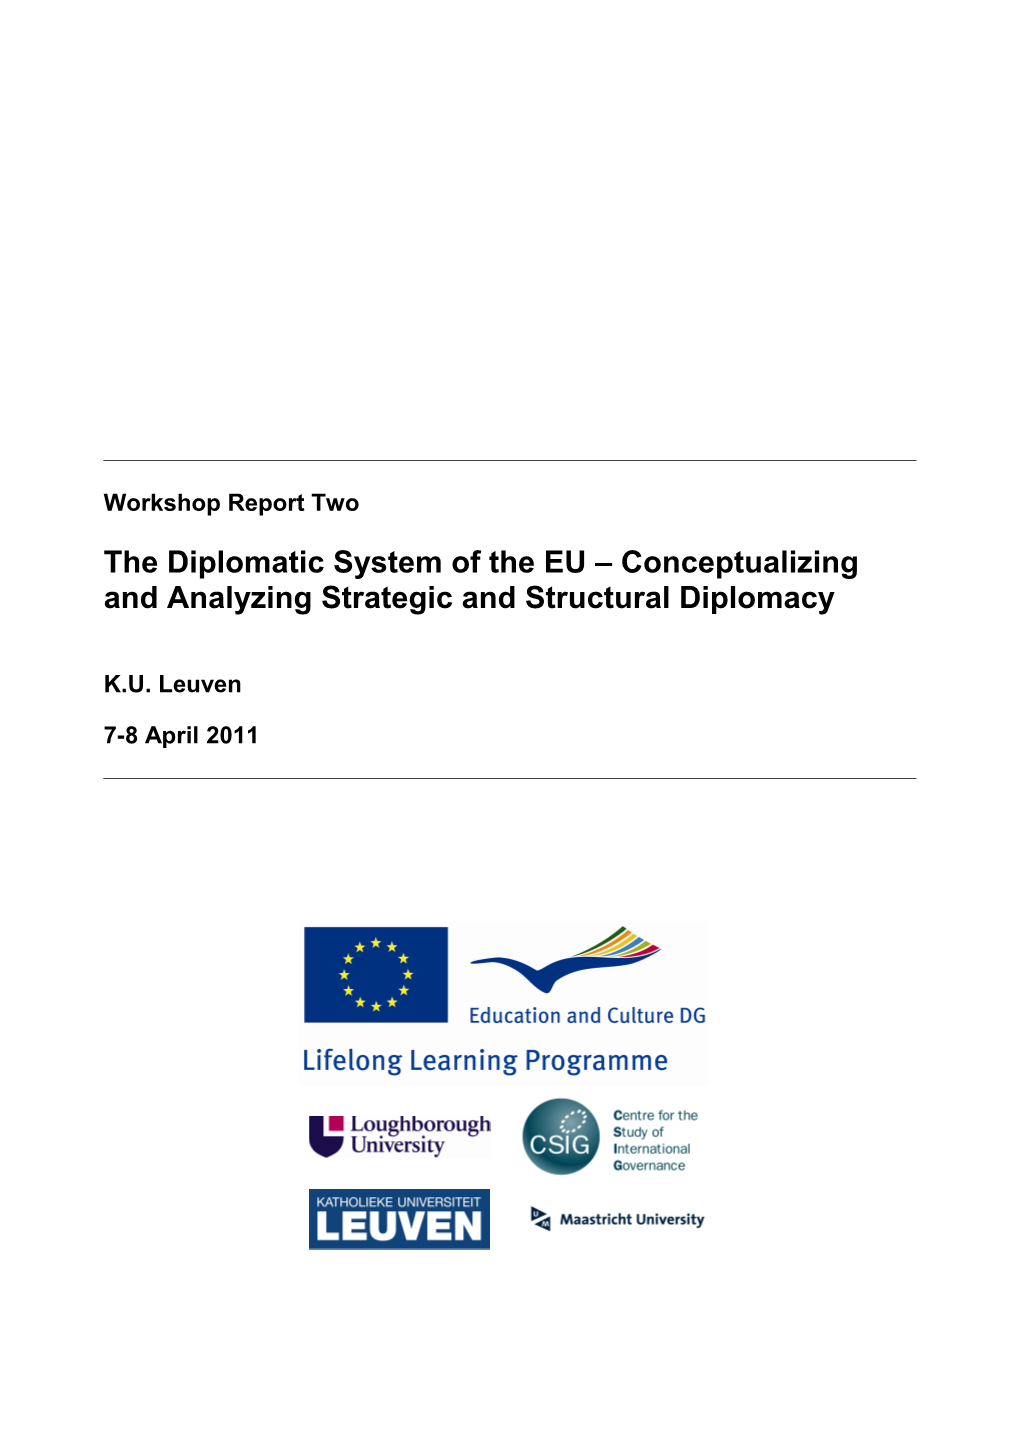 Central and Eastern Europe and the European Union Court System